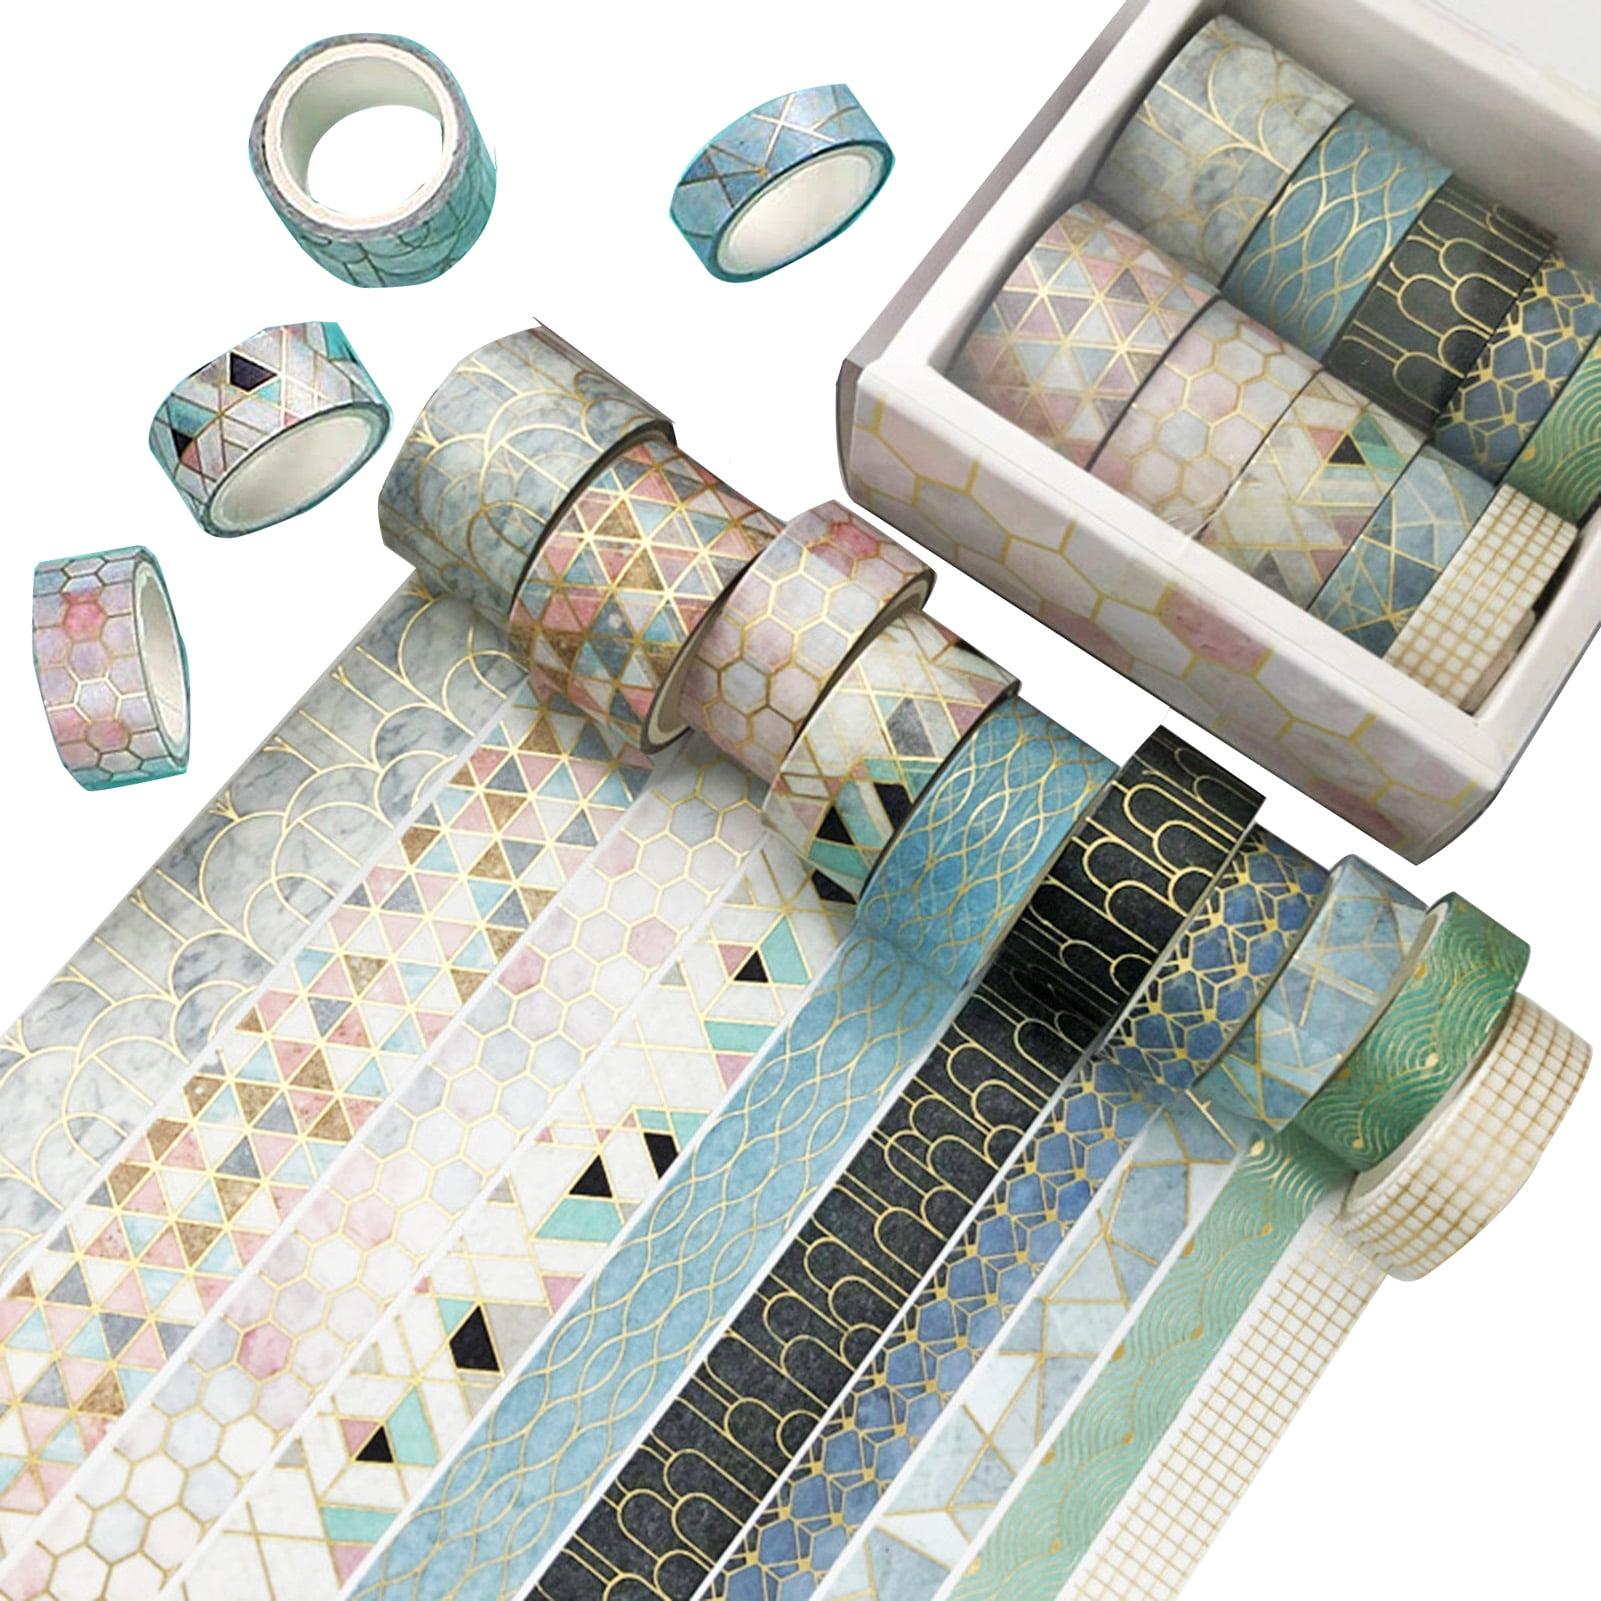 Green Decorative Masking Adhesive Tape Stickers Set with Exquisite Box for Traveler Notebook Journal Scrapbook Crafting Photo Album Washi Tape